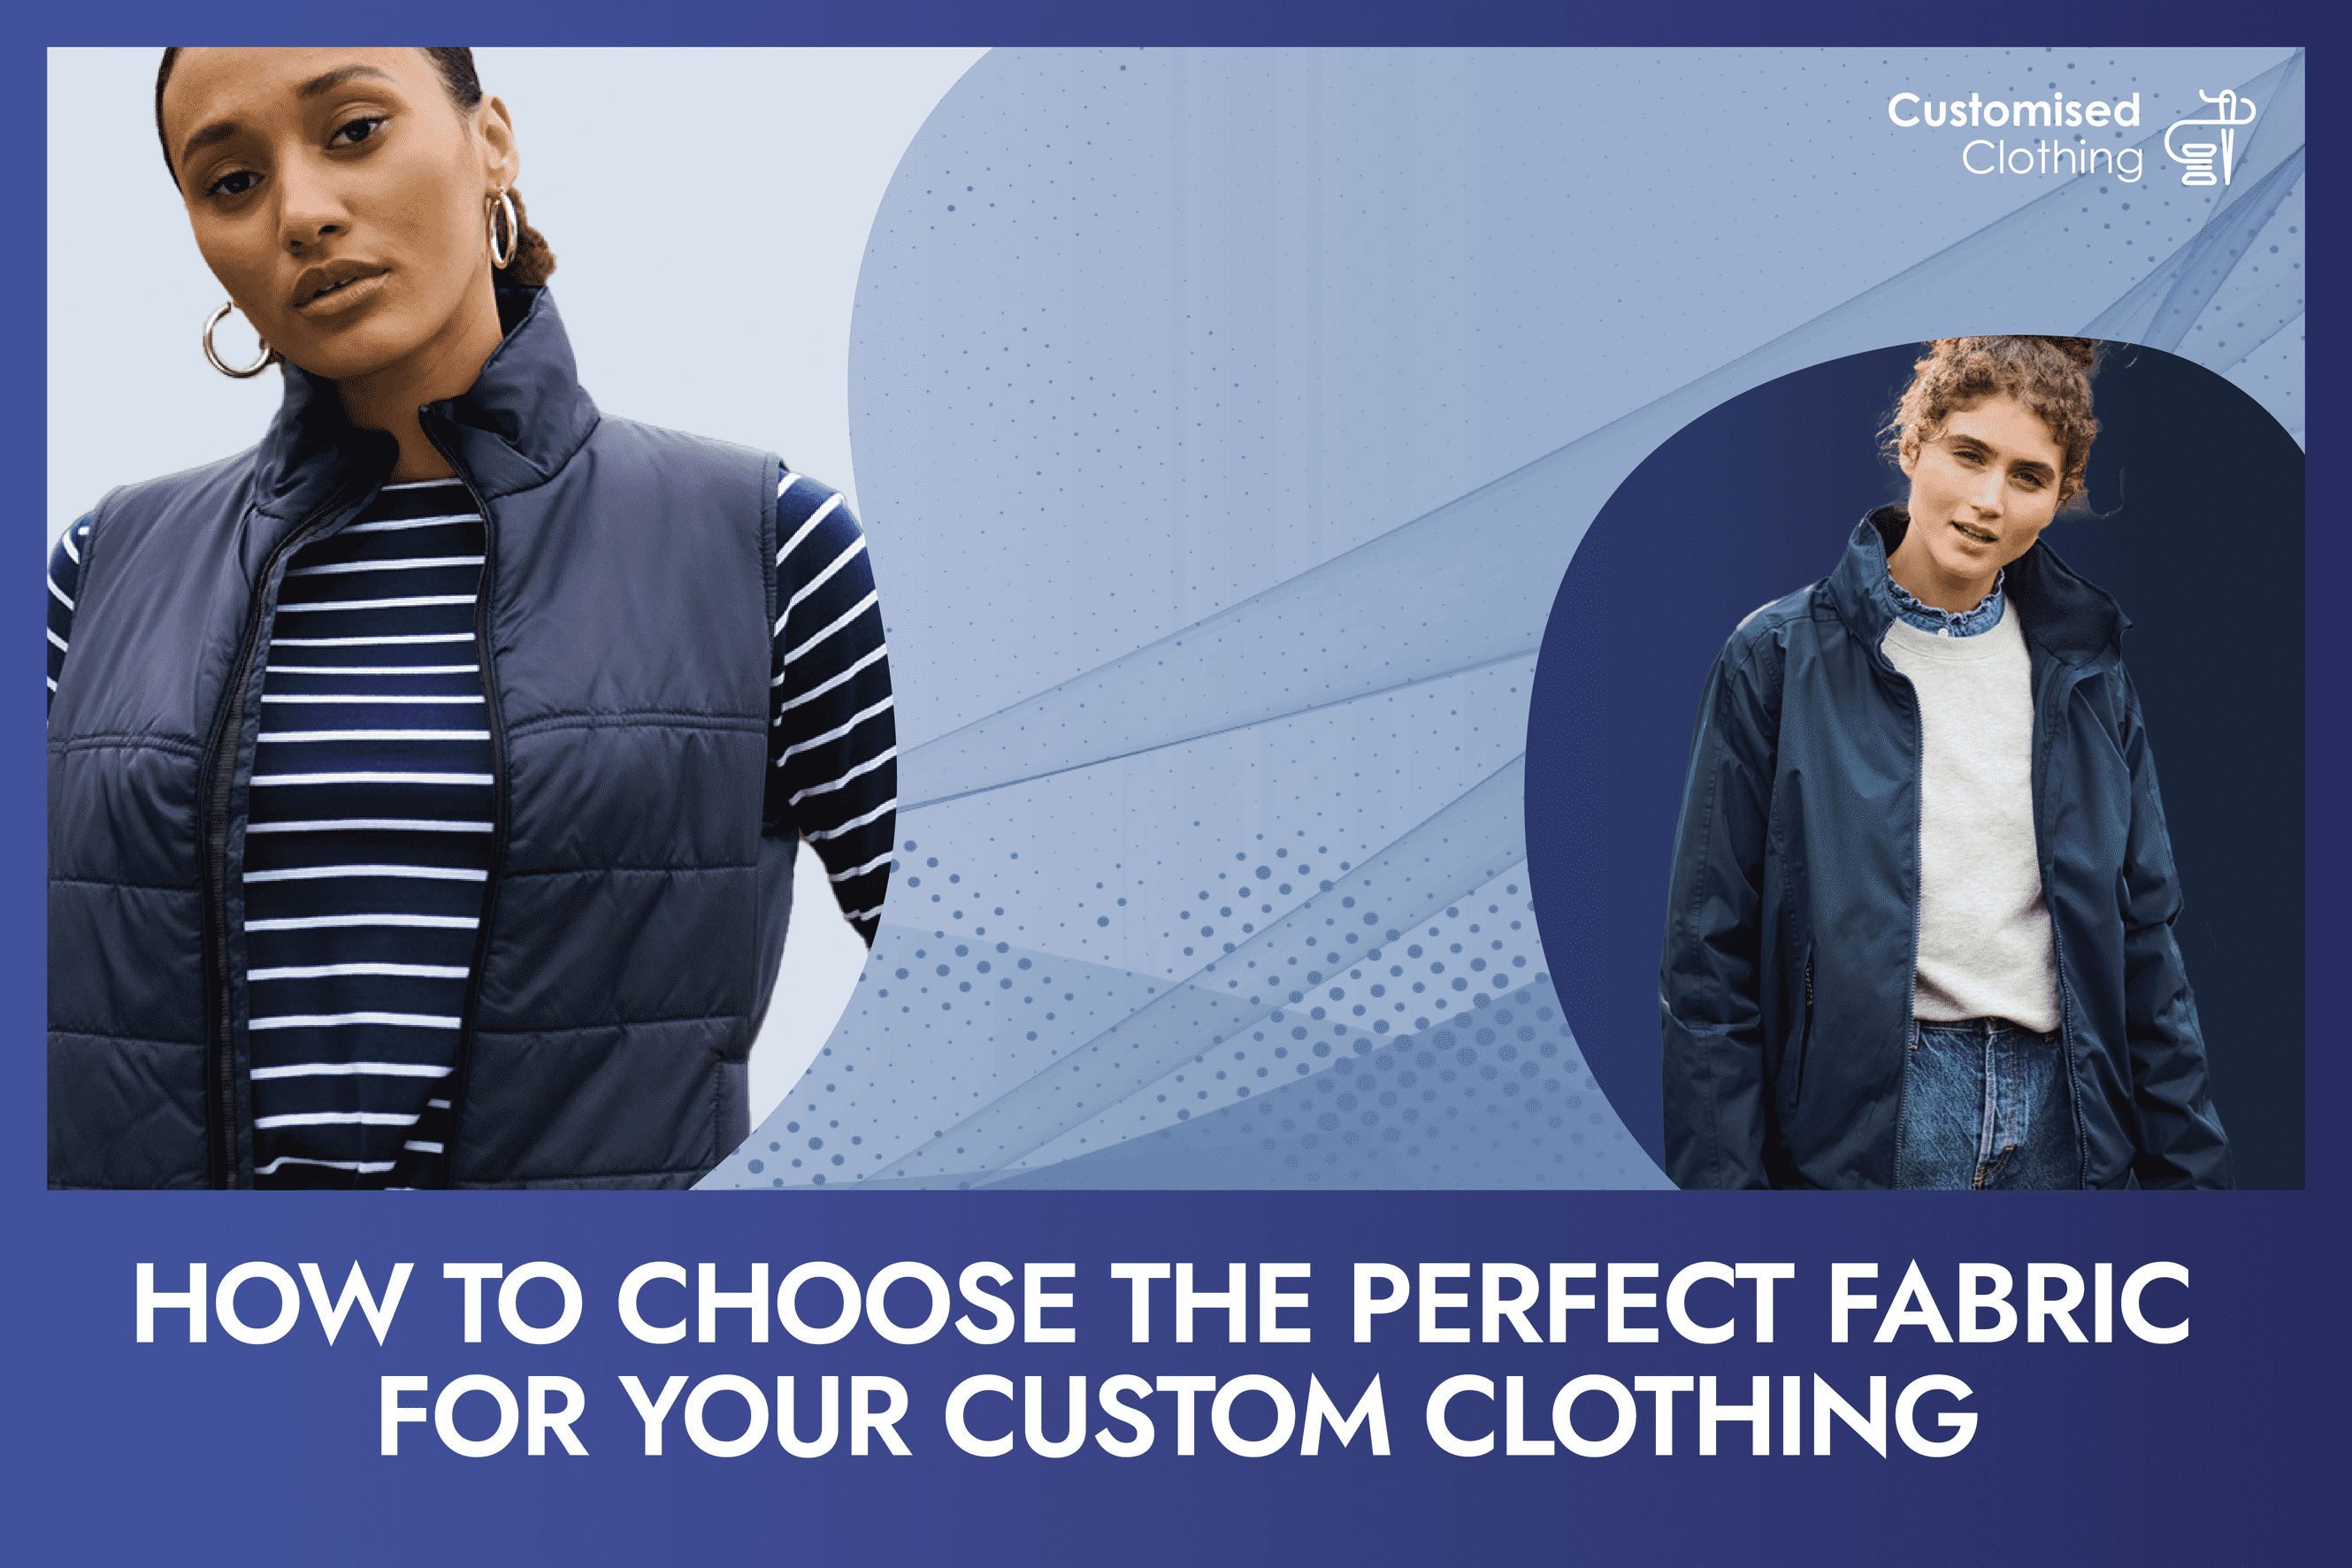 How to Choose the Perfect Fabric for Your Custom Clothing